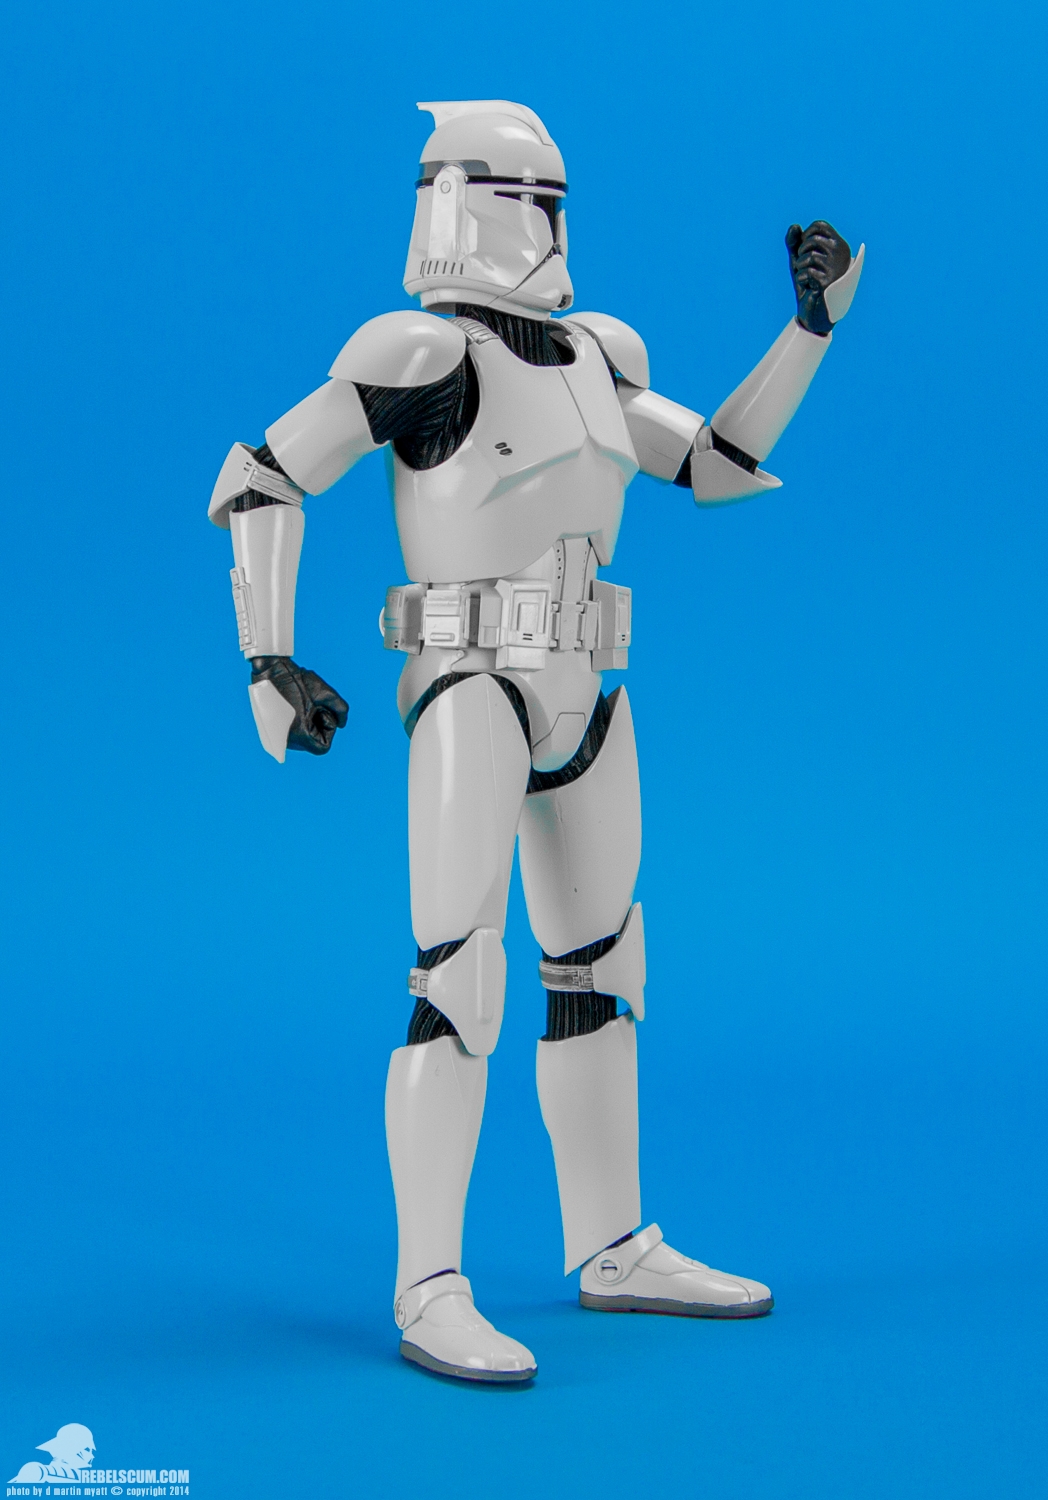 Shiny-Clone-Trooper-Deluxe-Sixth-Scale-Figure-Sideshow-002.jpg